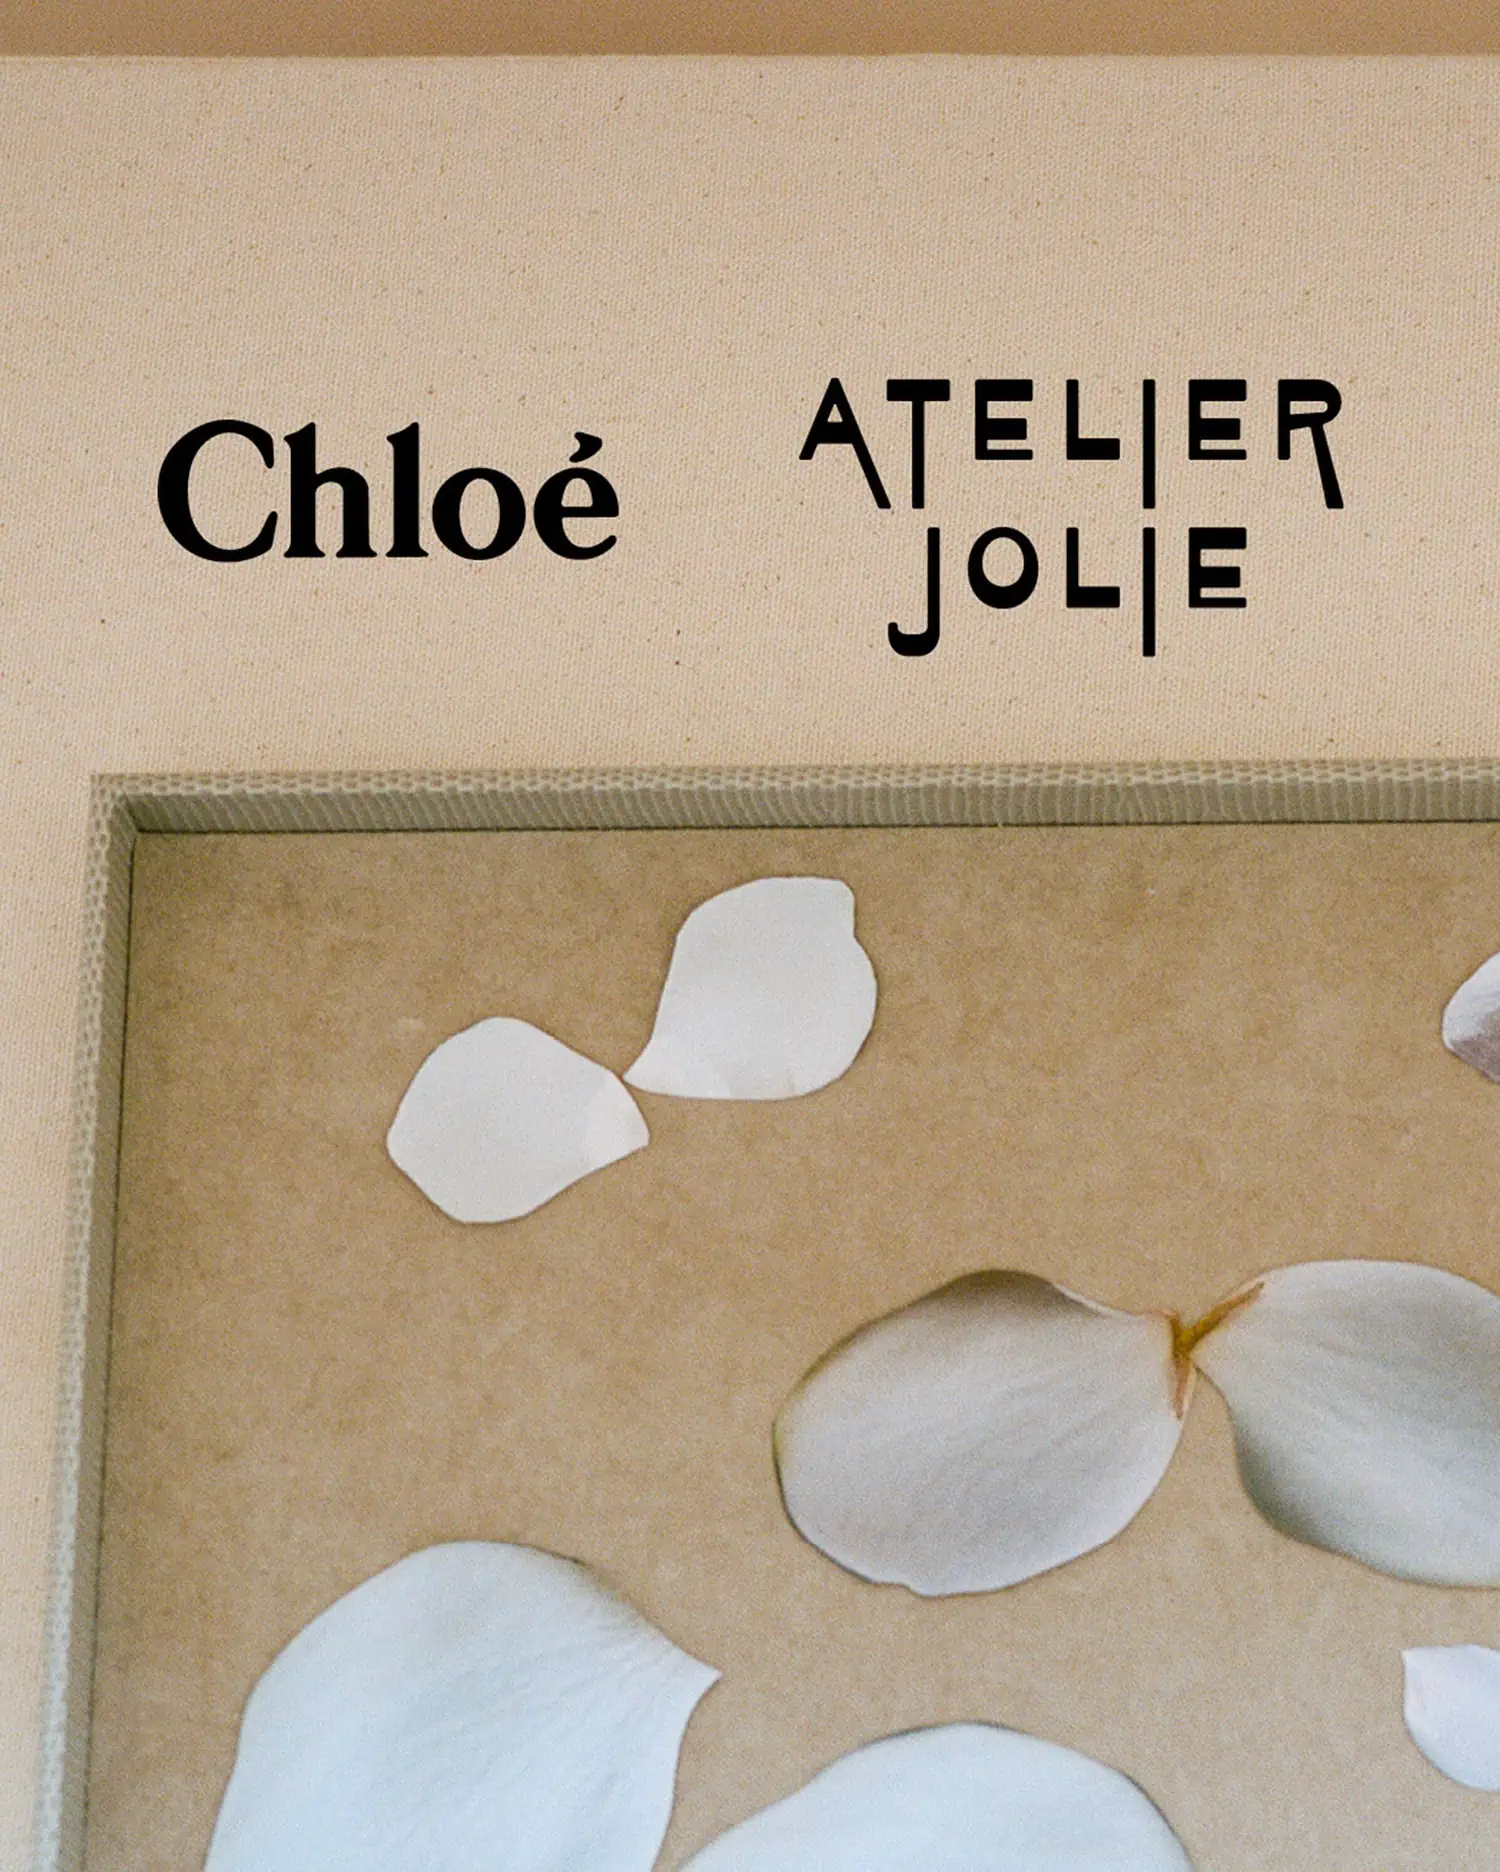 Discover the fashion elegance of the Chloé x Atelier Jolie collaboration